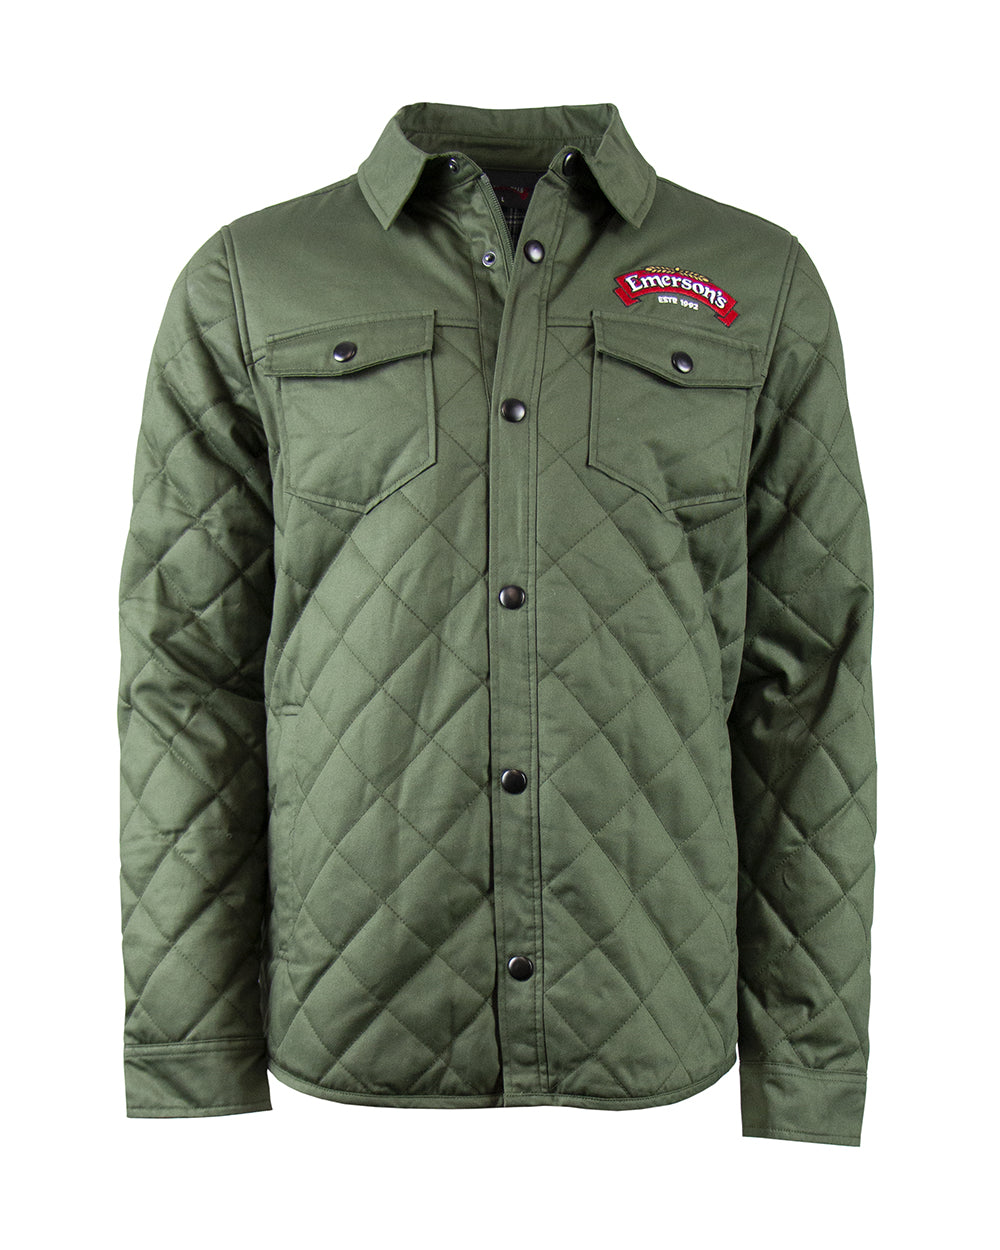 Emerson's Quilted Jacket -  Beer Gear Apparel & Merchandise - speights - lion red - vb - tokyo dry merch